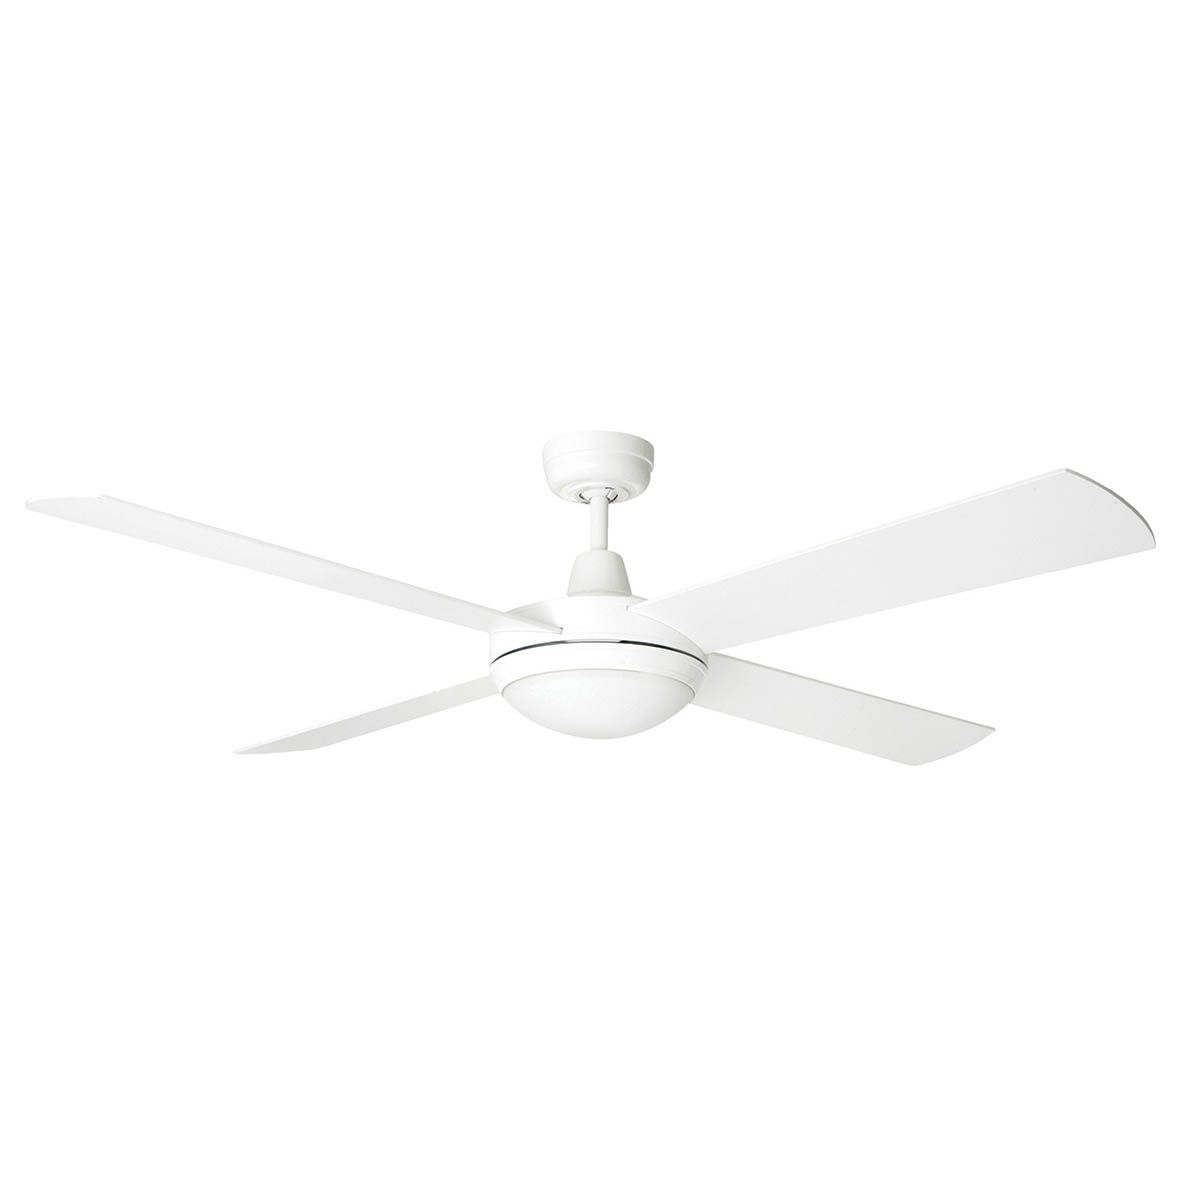 Brilliant 1300mm (52") STORM52 4 Blade Ceiling Sweep Fan With Plywood Blades & Light White